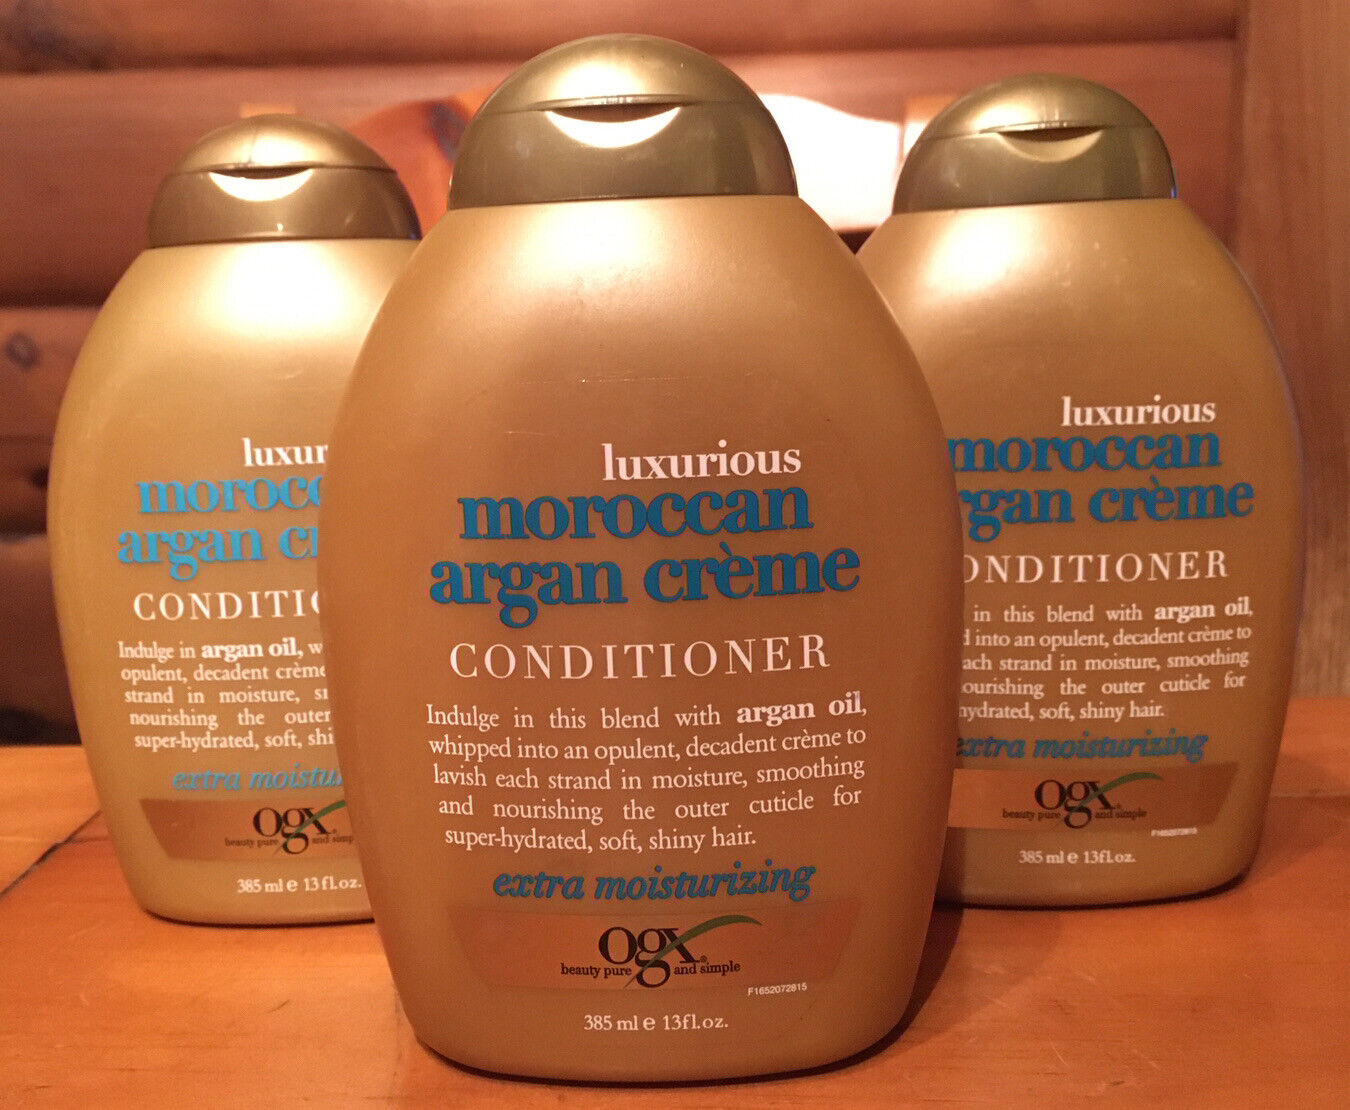 Lot of (3) OGX Luxurious Moroccan Argan Crème Conditioner 13 oz. each